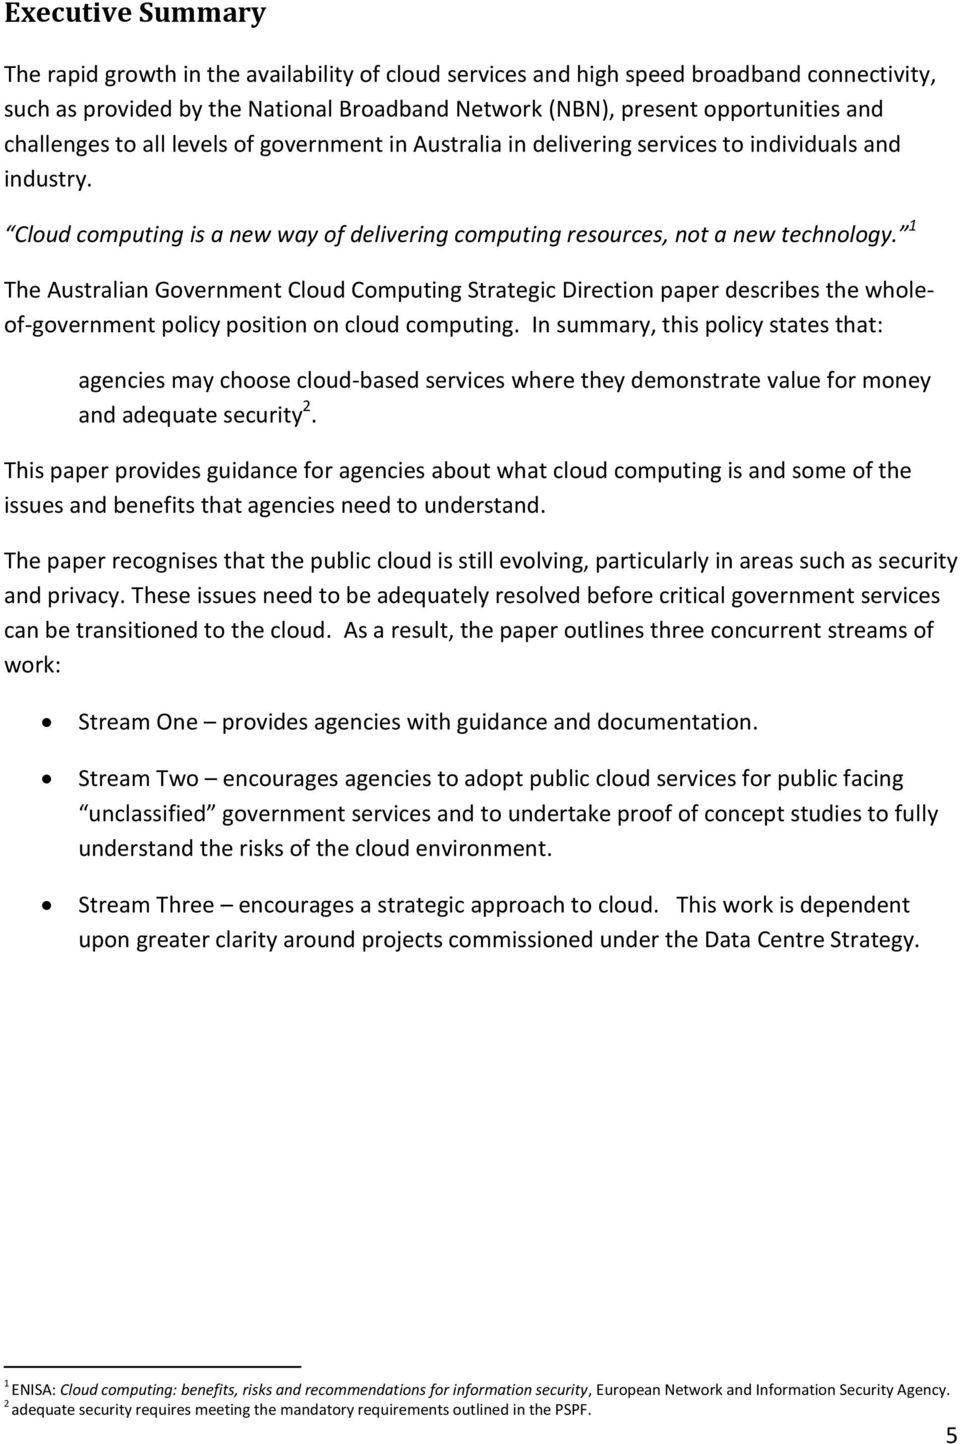 1 The Australian Government Cloud Computing Strategic Direction paper describes the wholeof-government policy position on cloud computing.